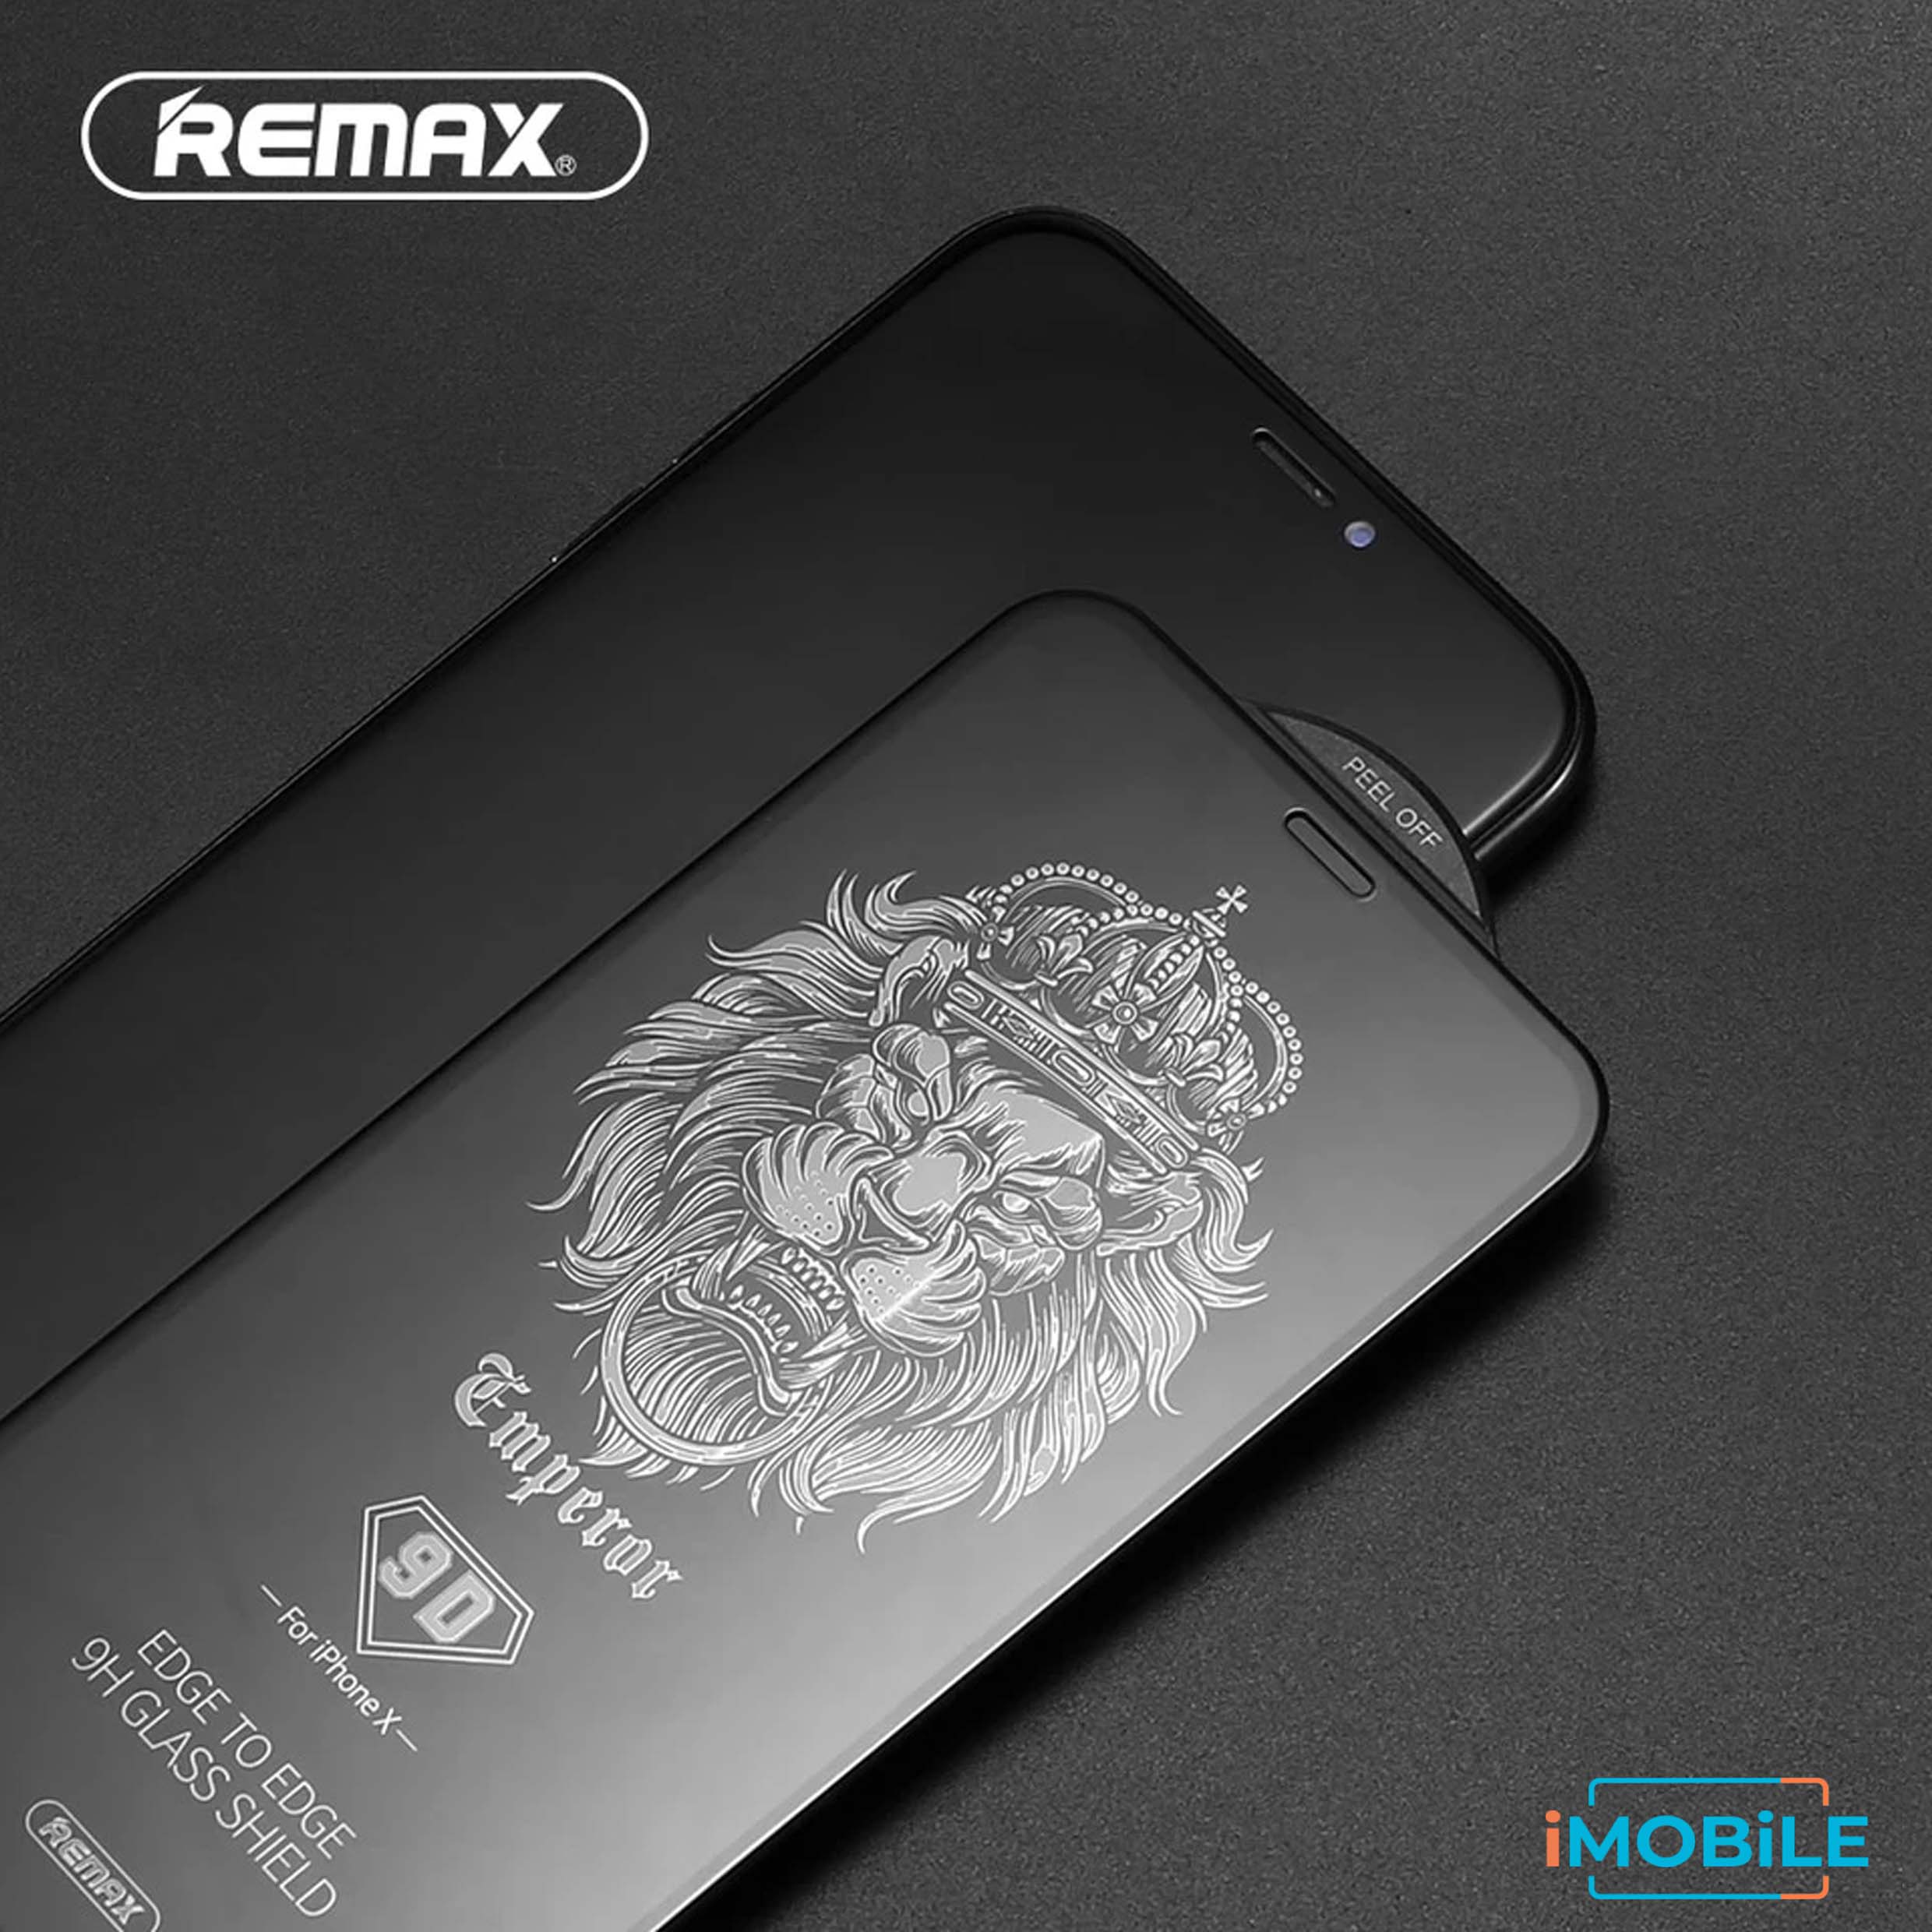 Remax 2.5D Tempered Glass with Envelope Pack, iPhone 7 Plus/8 Plus [White]